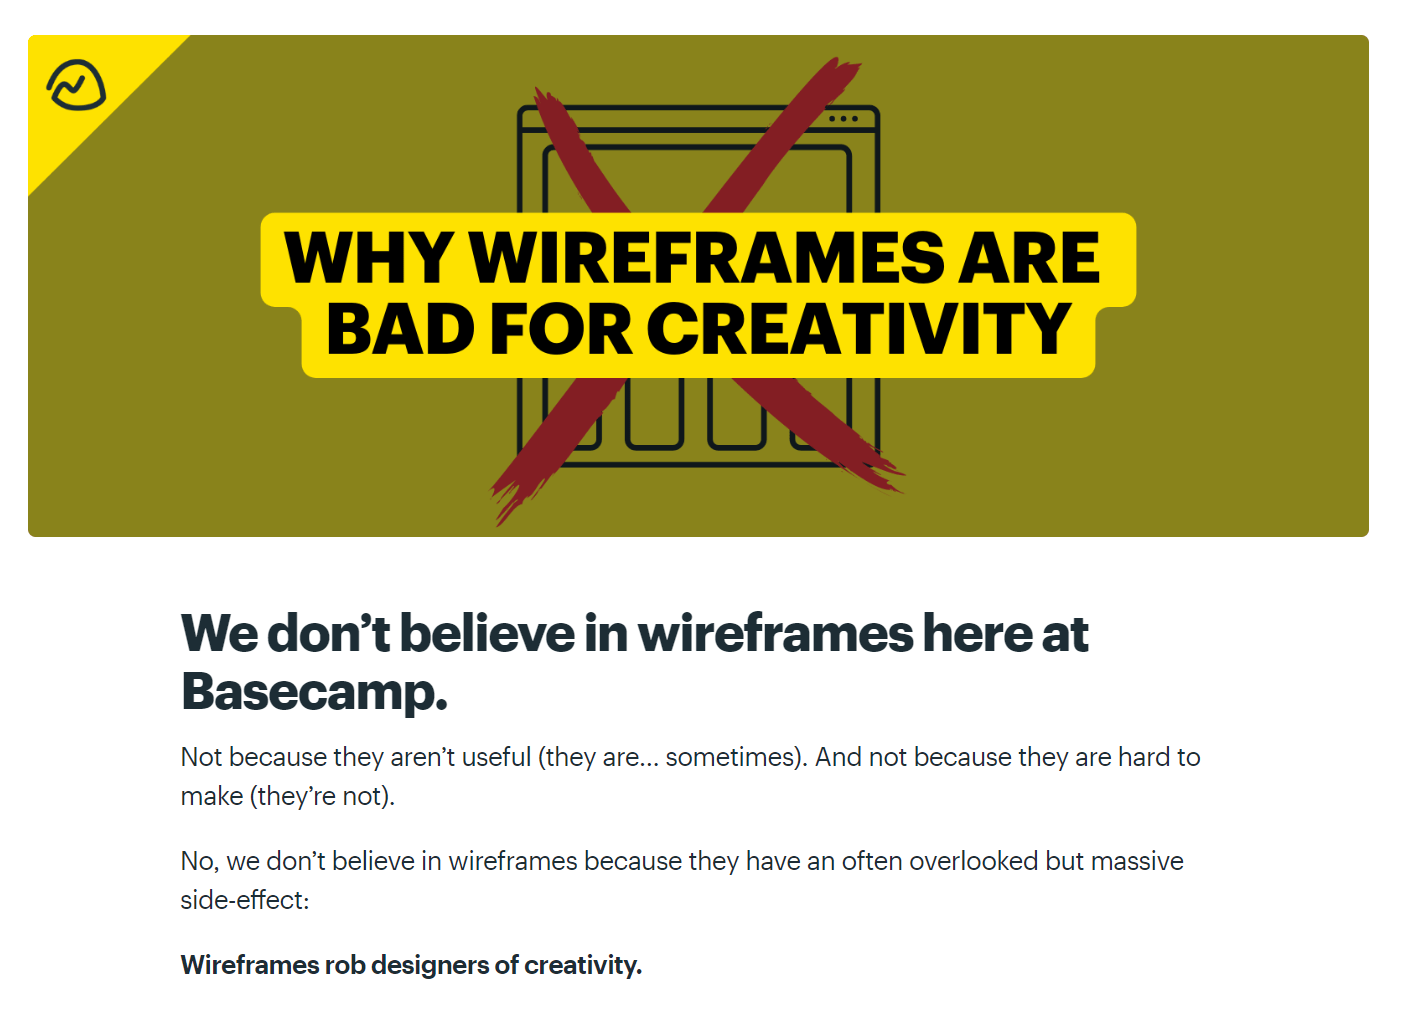 Basecamp explains why they don't use wireframes.